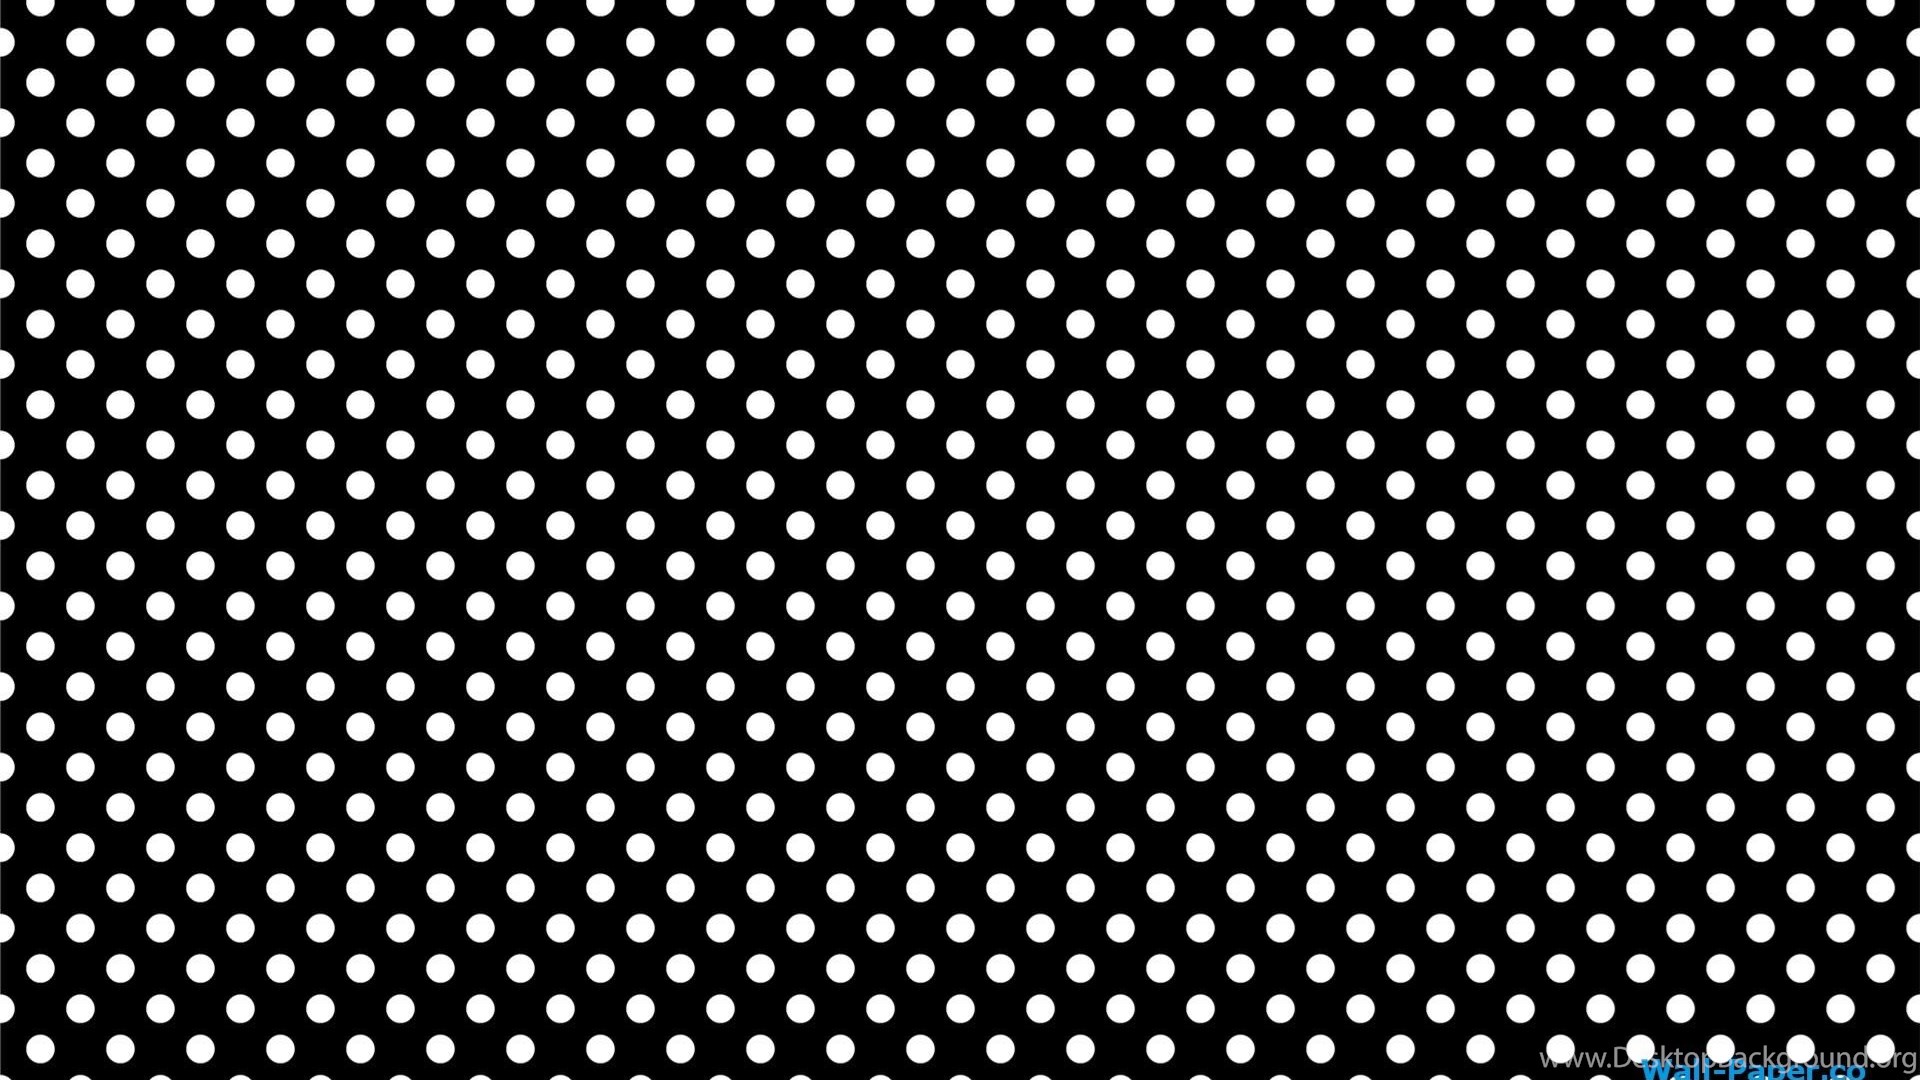 Black And White Polka Dot Wallpapers Wallpapers HD Fine Desktop Background